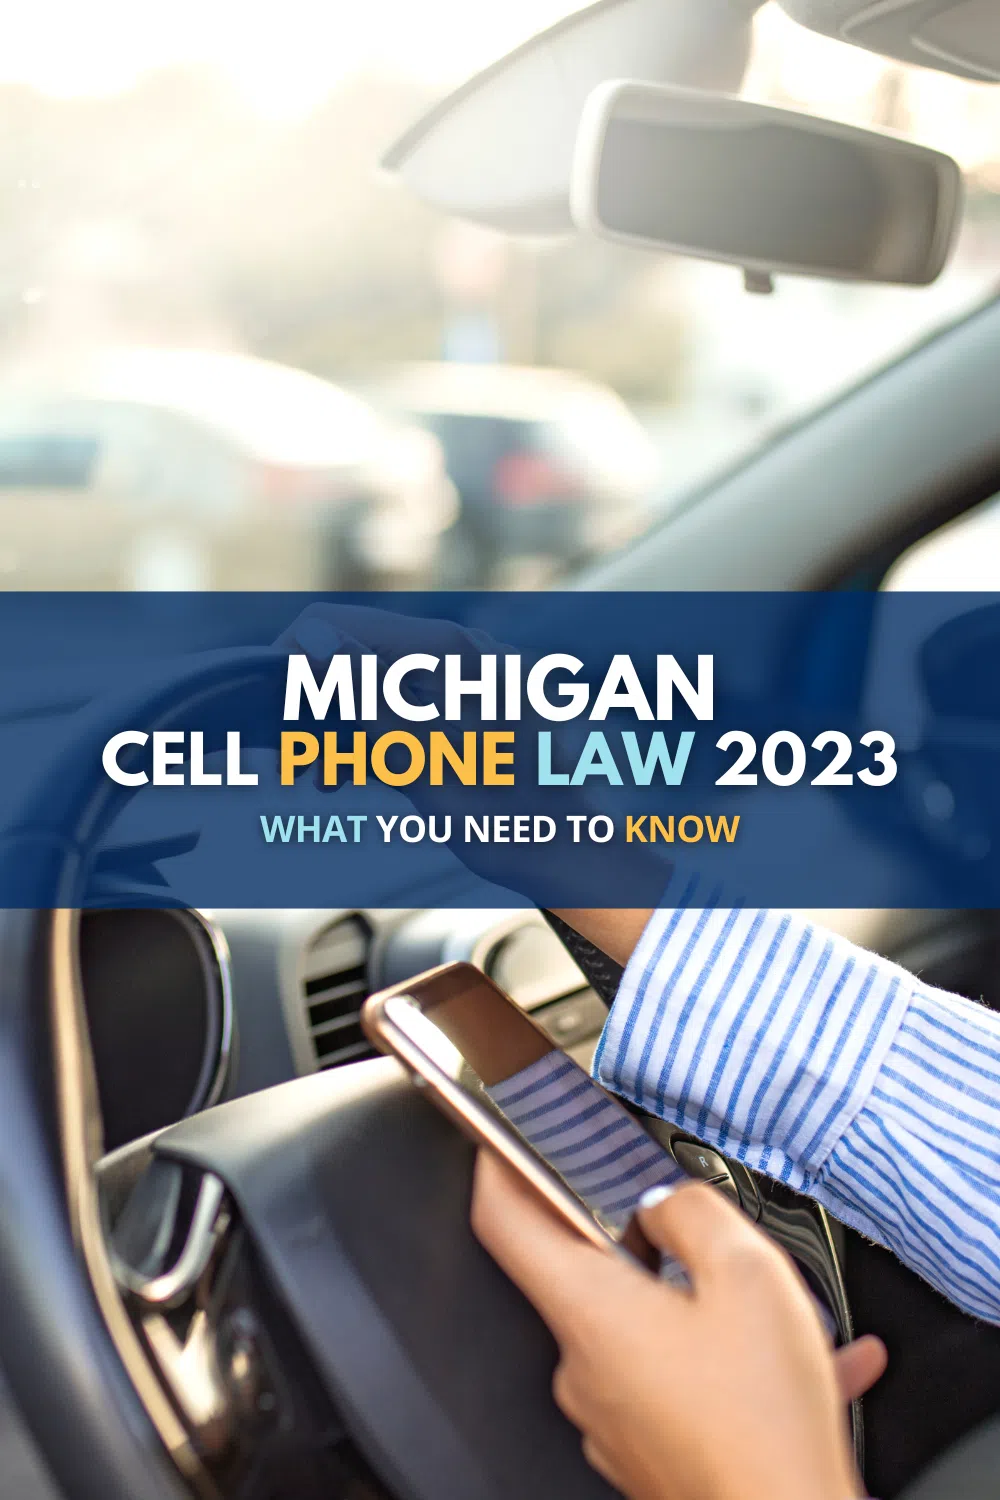 Michigan Cell Phone Law 2023: What You Need To Know